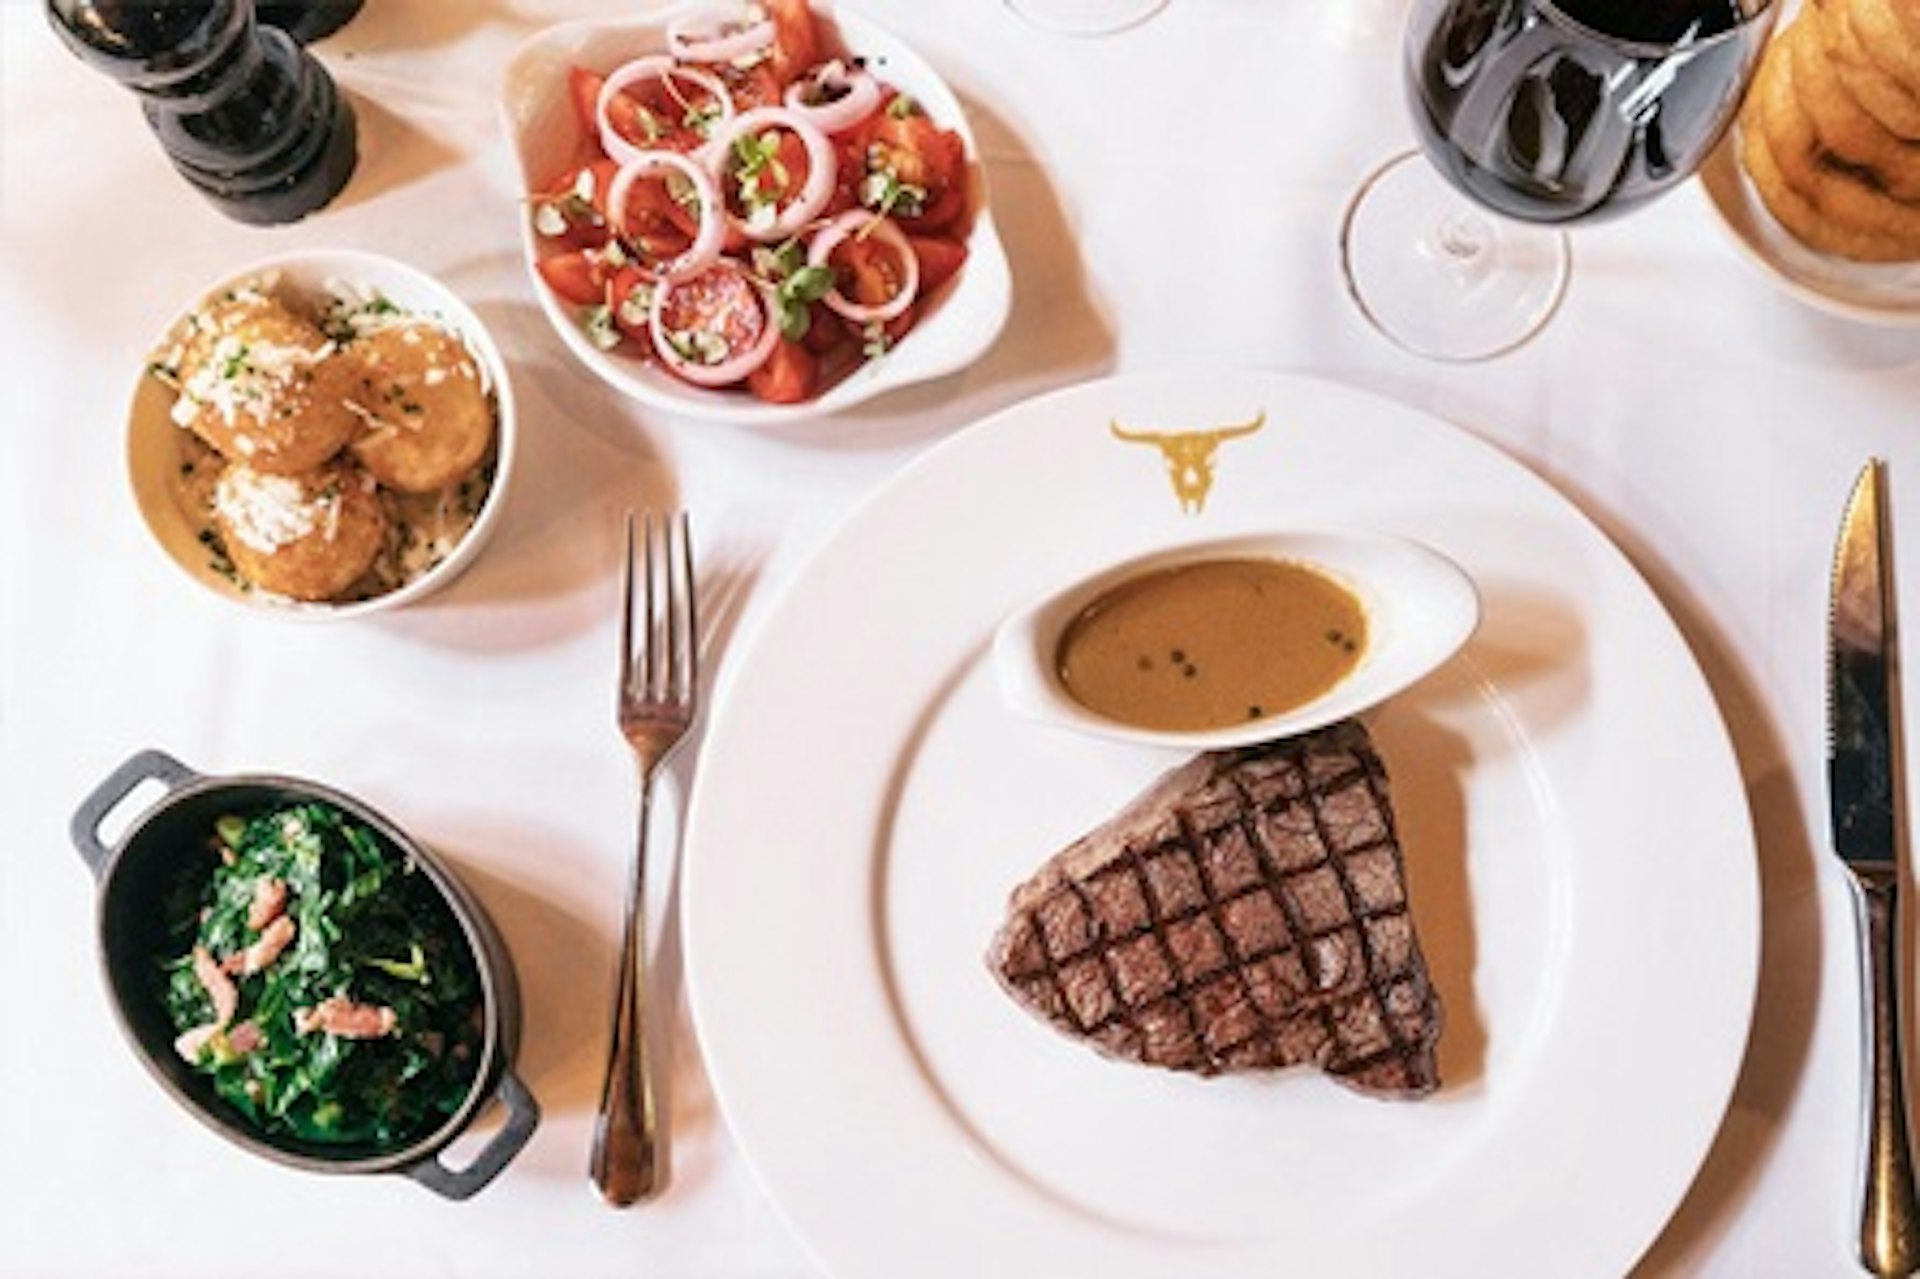 Three Course Champagne Celebration Dining for Two at Marco Pierre White's London Steakhouse Co 1